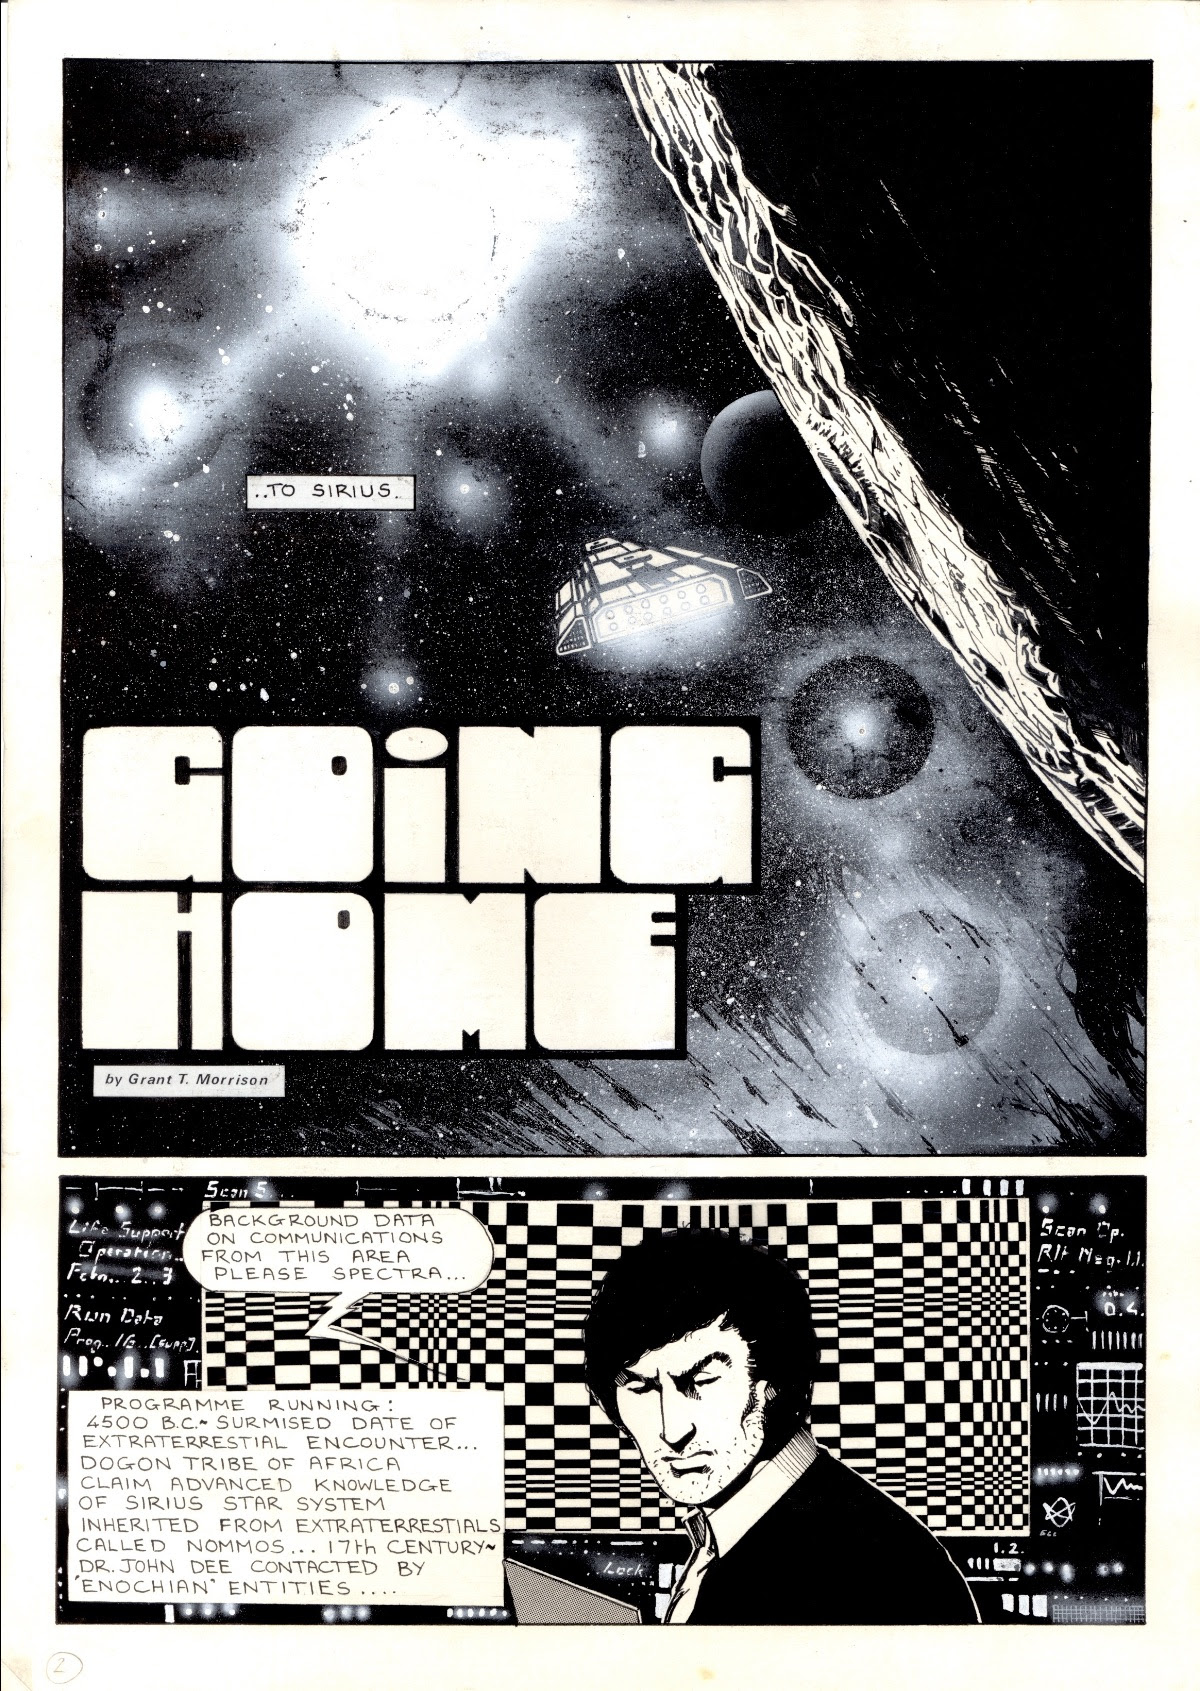 1982's "Going Home": Art and story by Grant Morrison